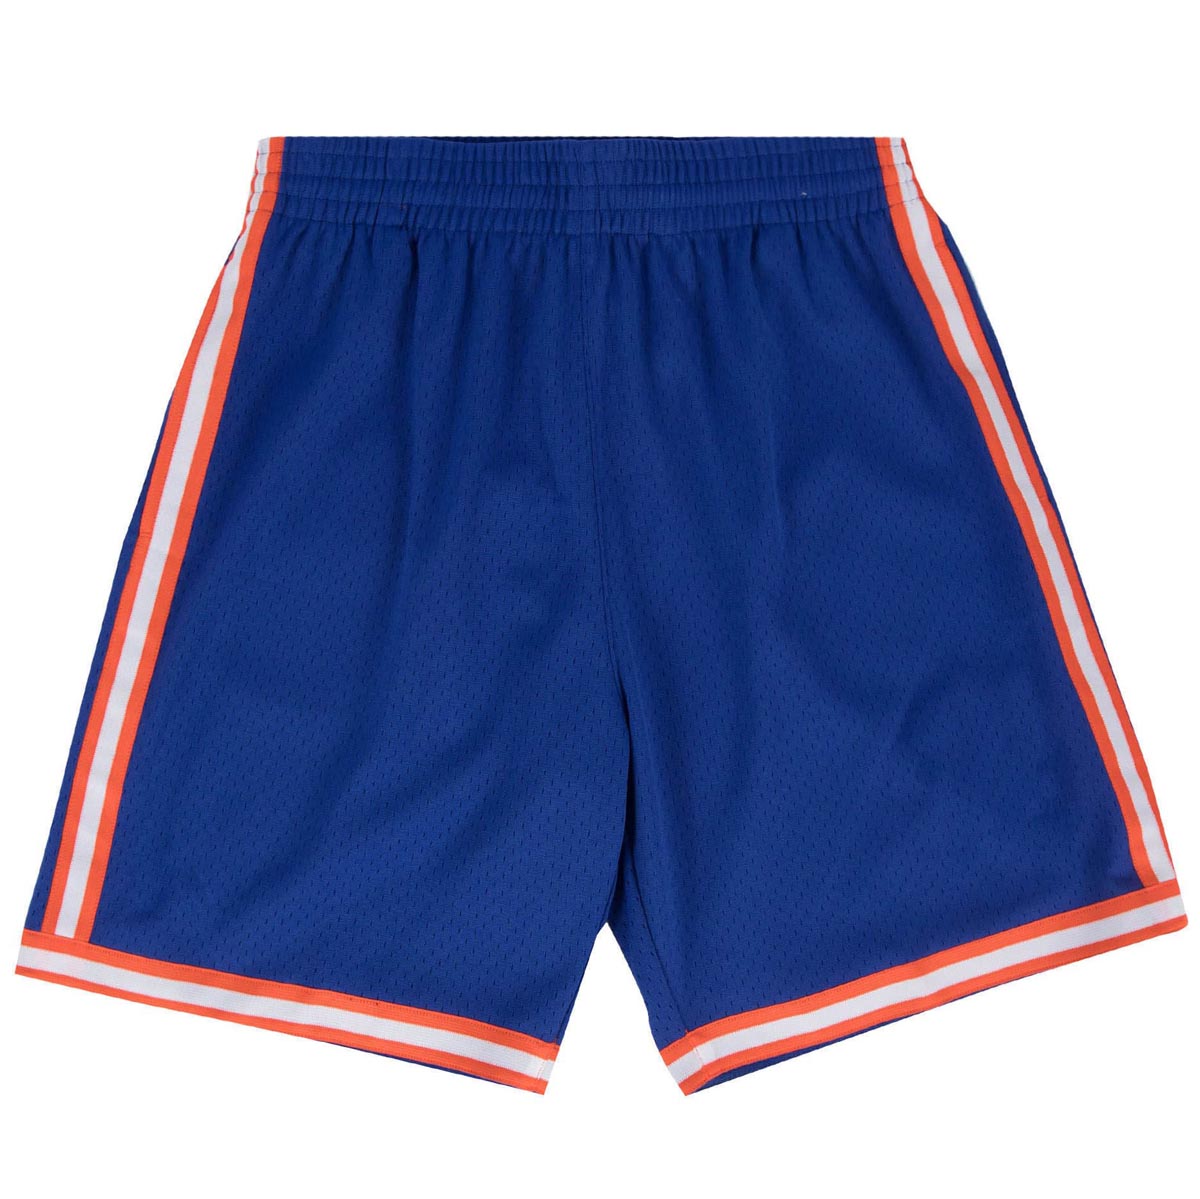 Mitchell & Ness x NBA Roses And Banners Knicks Shorts - Royal image 2